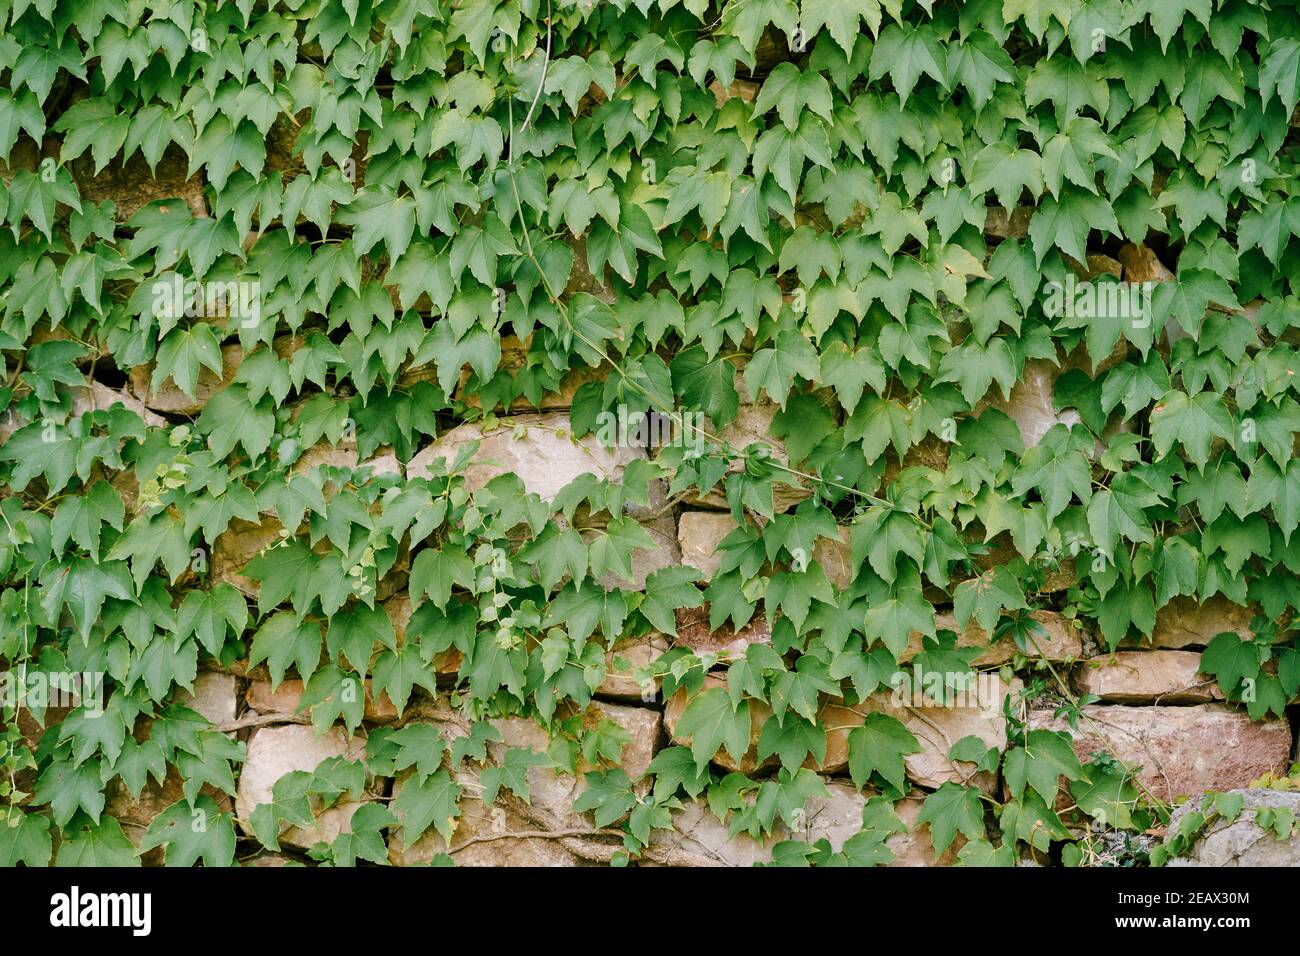 Green leaves of maiden grapes on a stone wall. Stock Photo